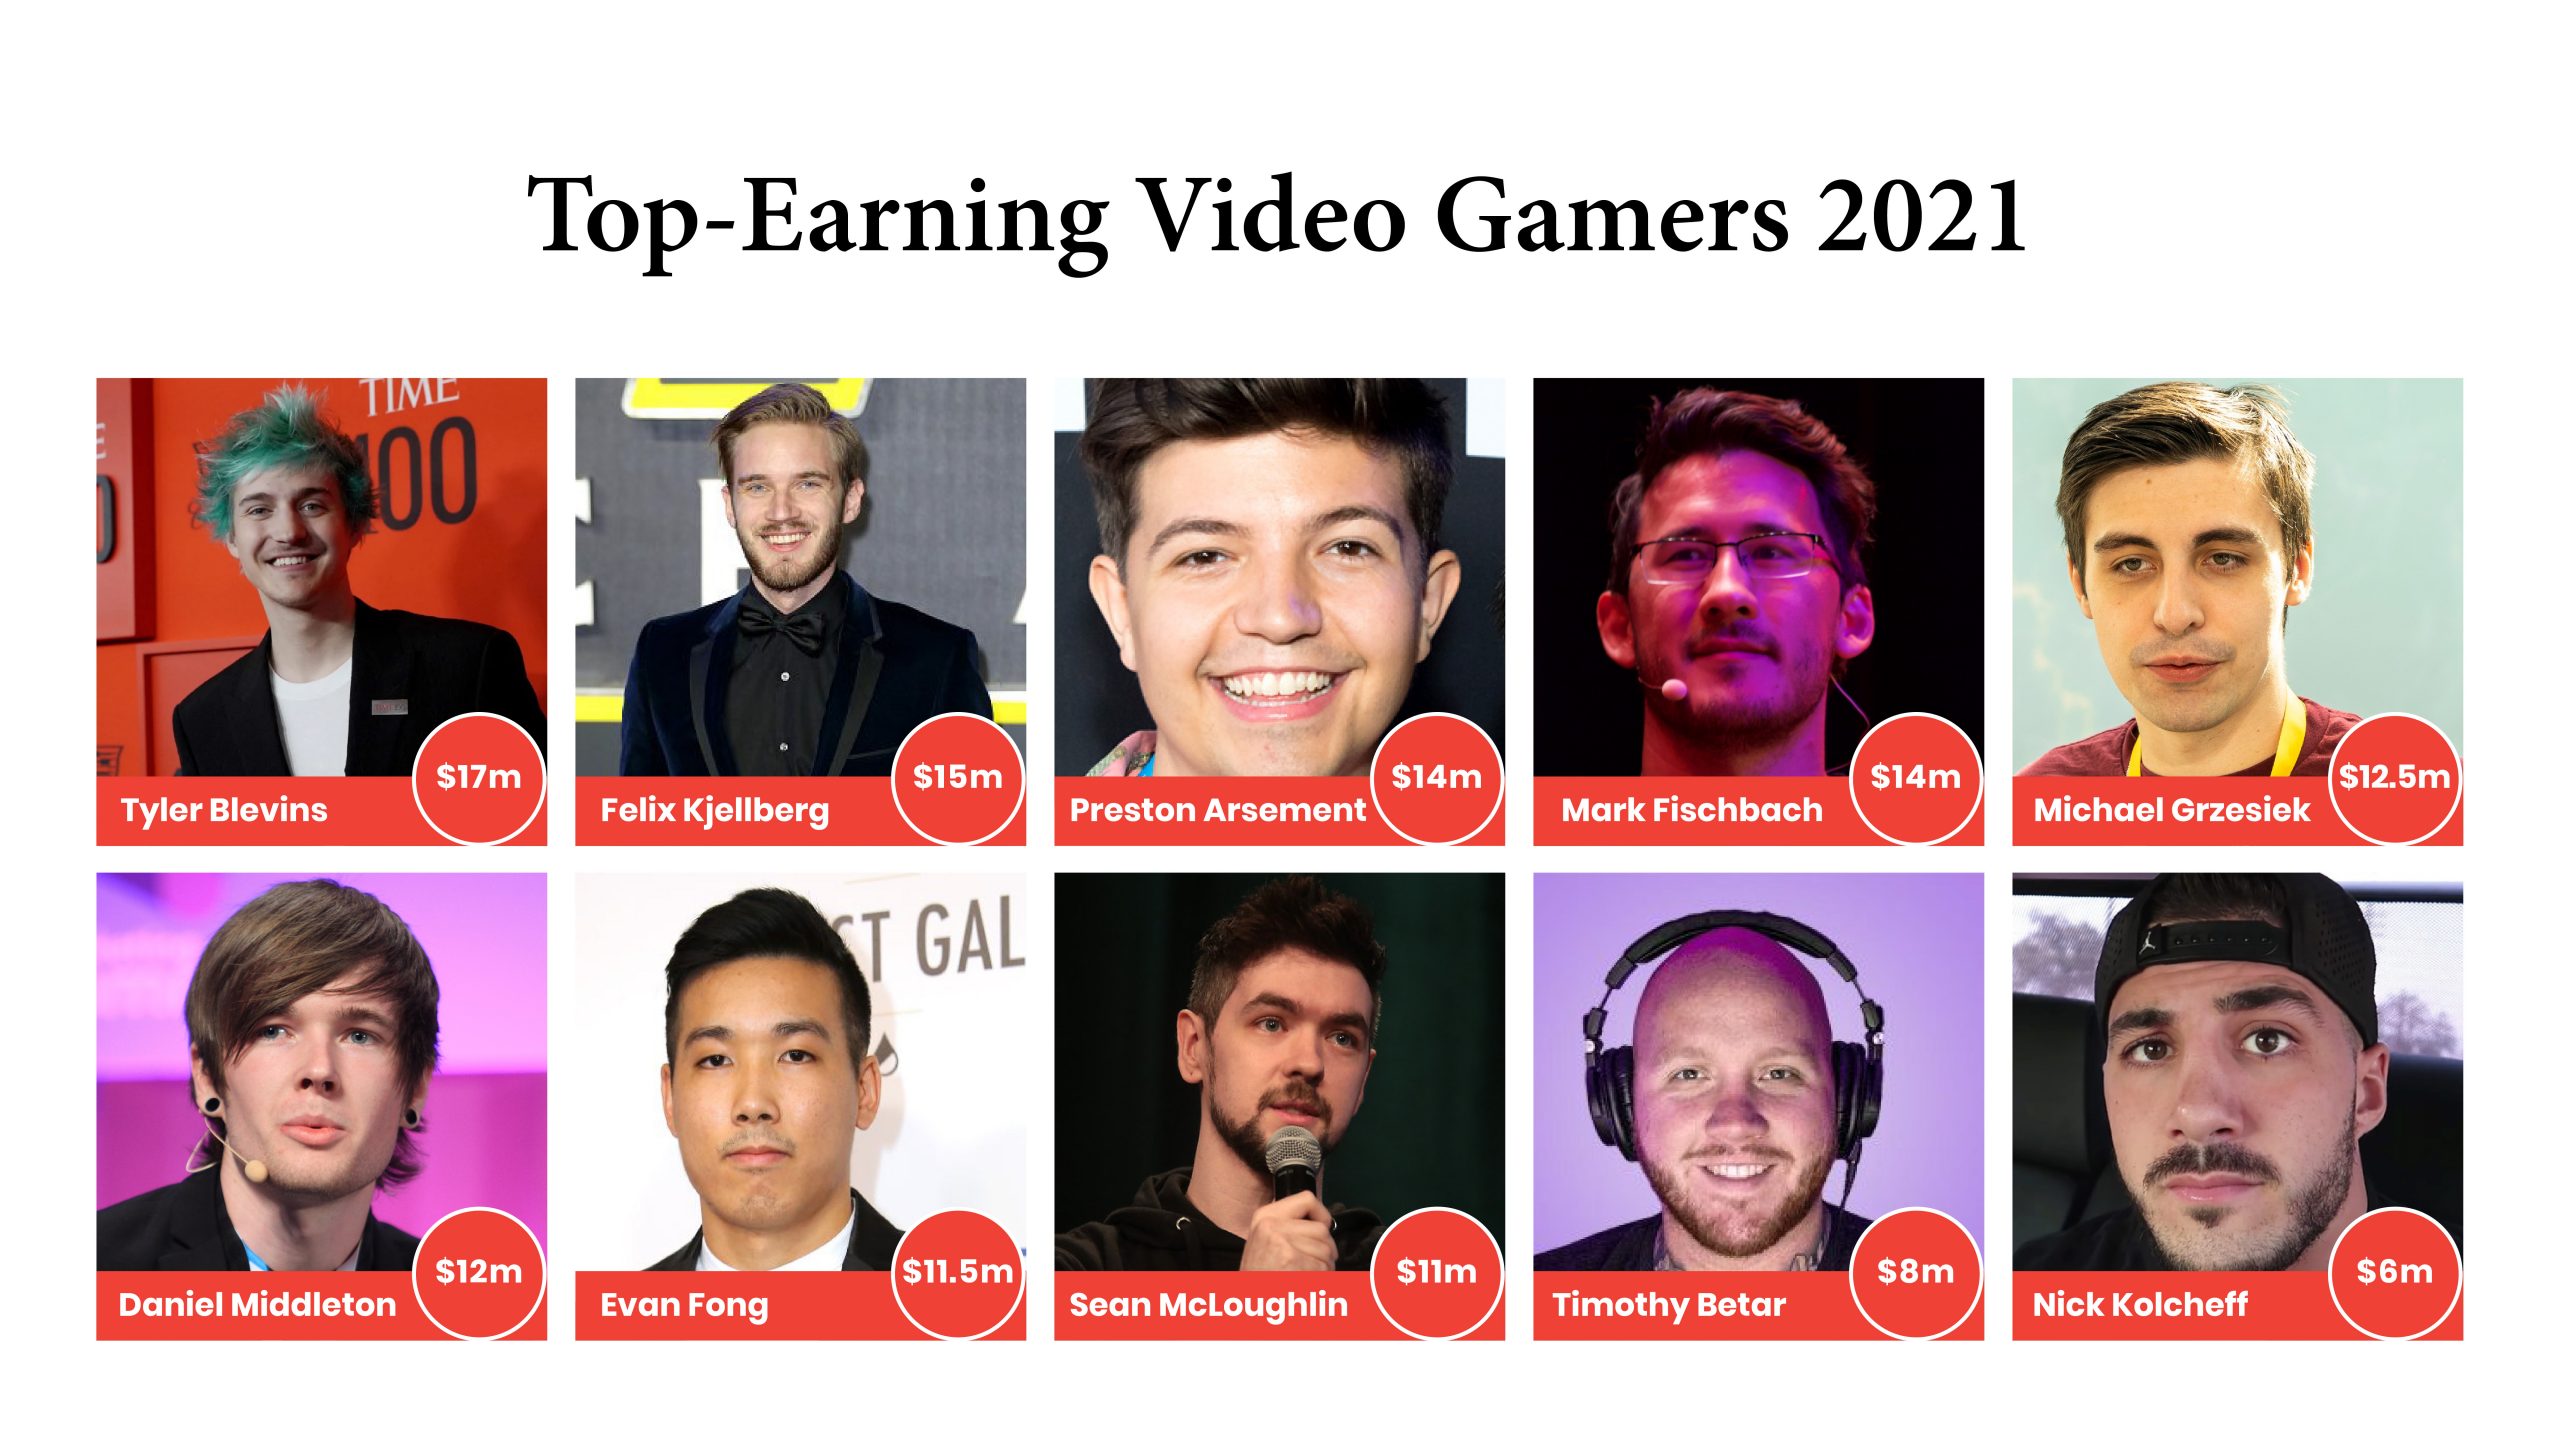 Top-Earning Video Gamers of 2021